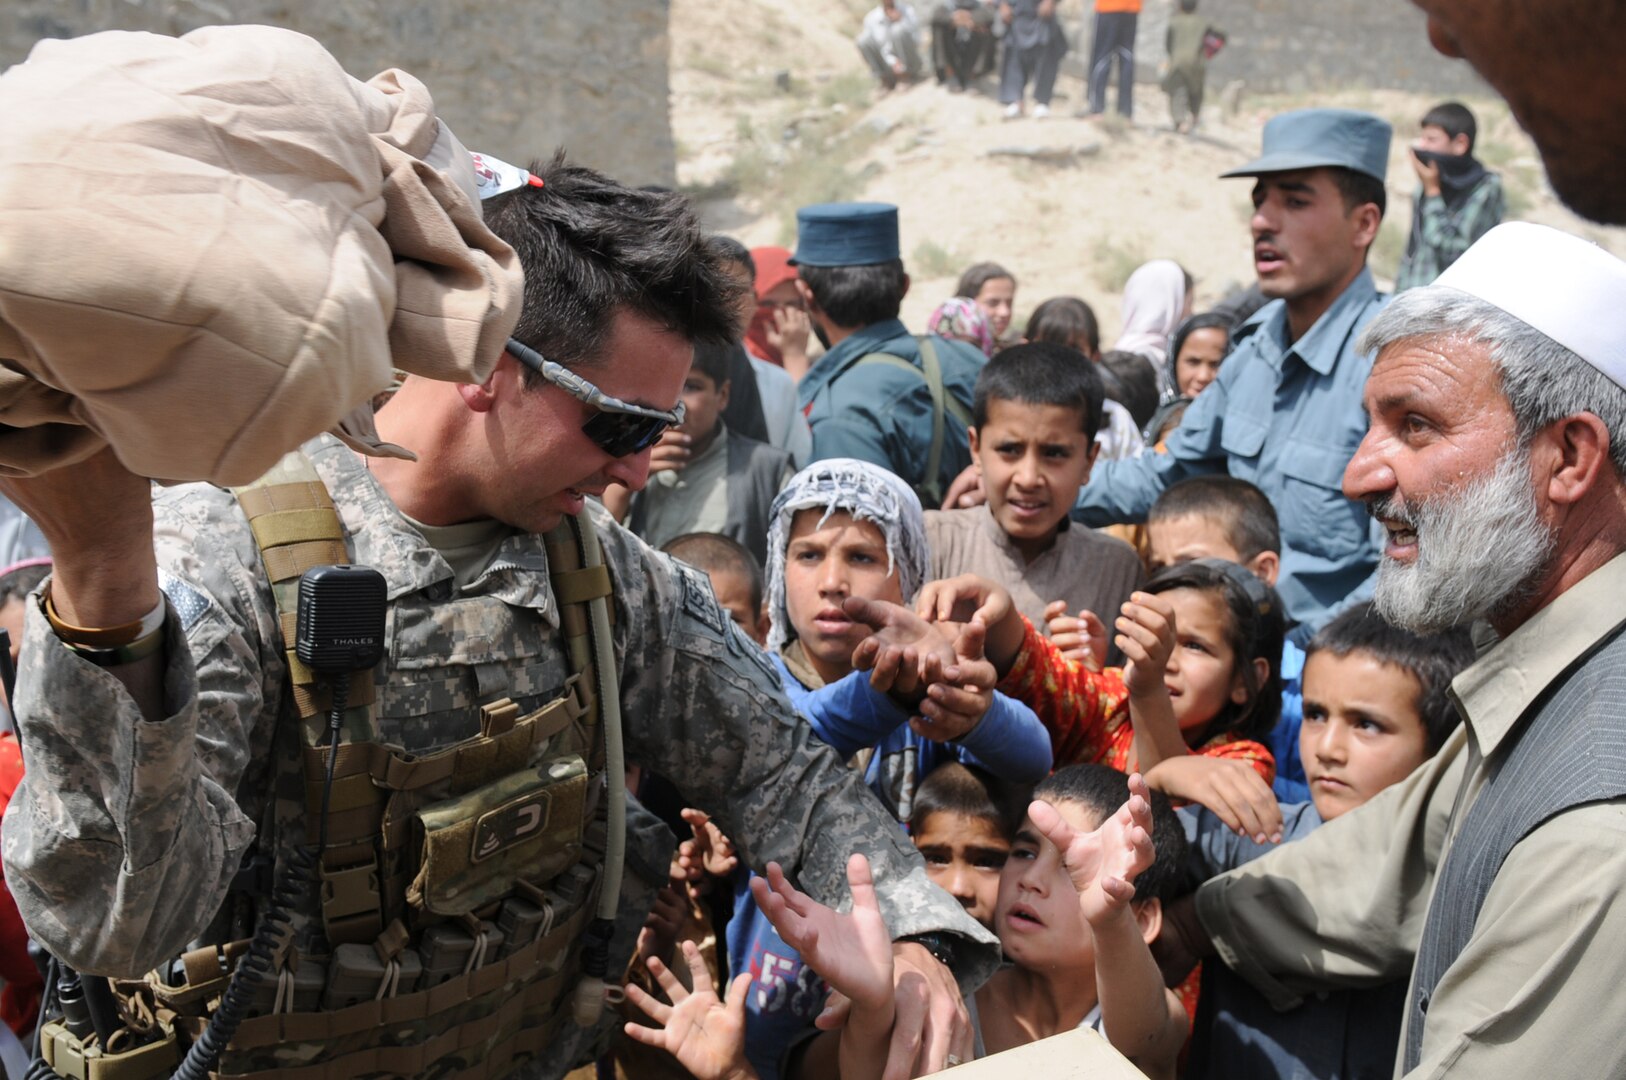 Staff Sgt. Joshua Smith, squad leader for Police Mentor Team 7, Bravo Battery, 1st Battalion, 101st Field Artillery of the Vermont Army National Guard, grabs a bundle of clothing for a child from the Shohadayi Salehin village during a humanitarian aid drop for needy school kids in one of the city's poorest neighborhoods in Kabul, Afghanistan Sept. 6, 2010. The Vermont Guard unit partnered with Afghan National Police to help hand out school supplies and demonstrate a goodwill initiative for the people they are helping to protect.